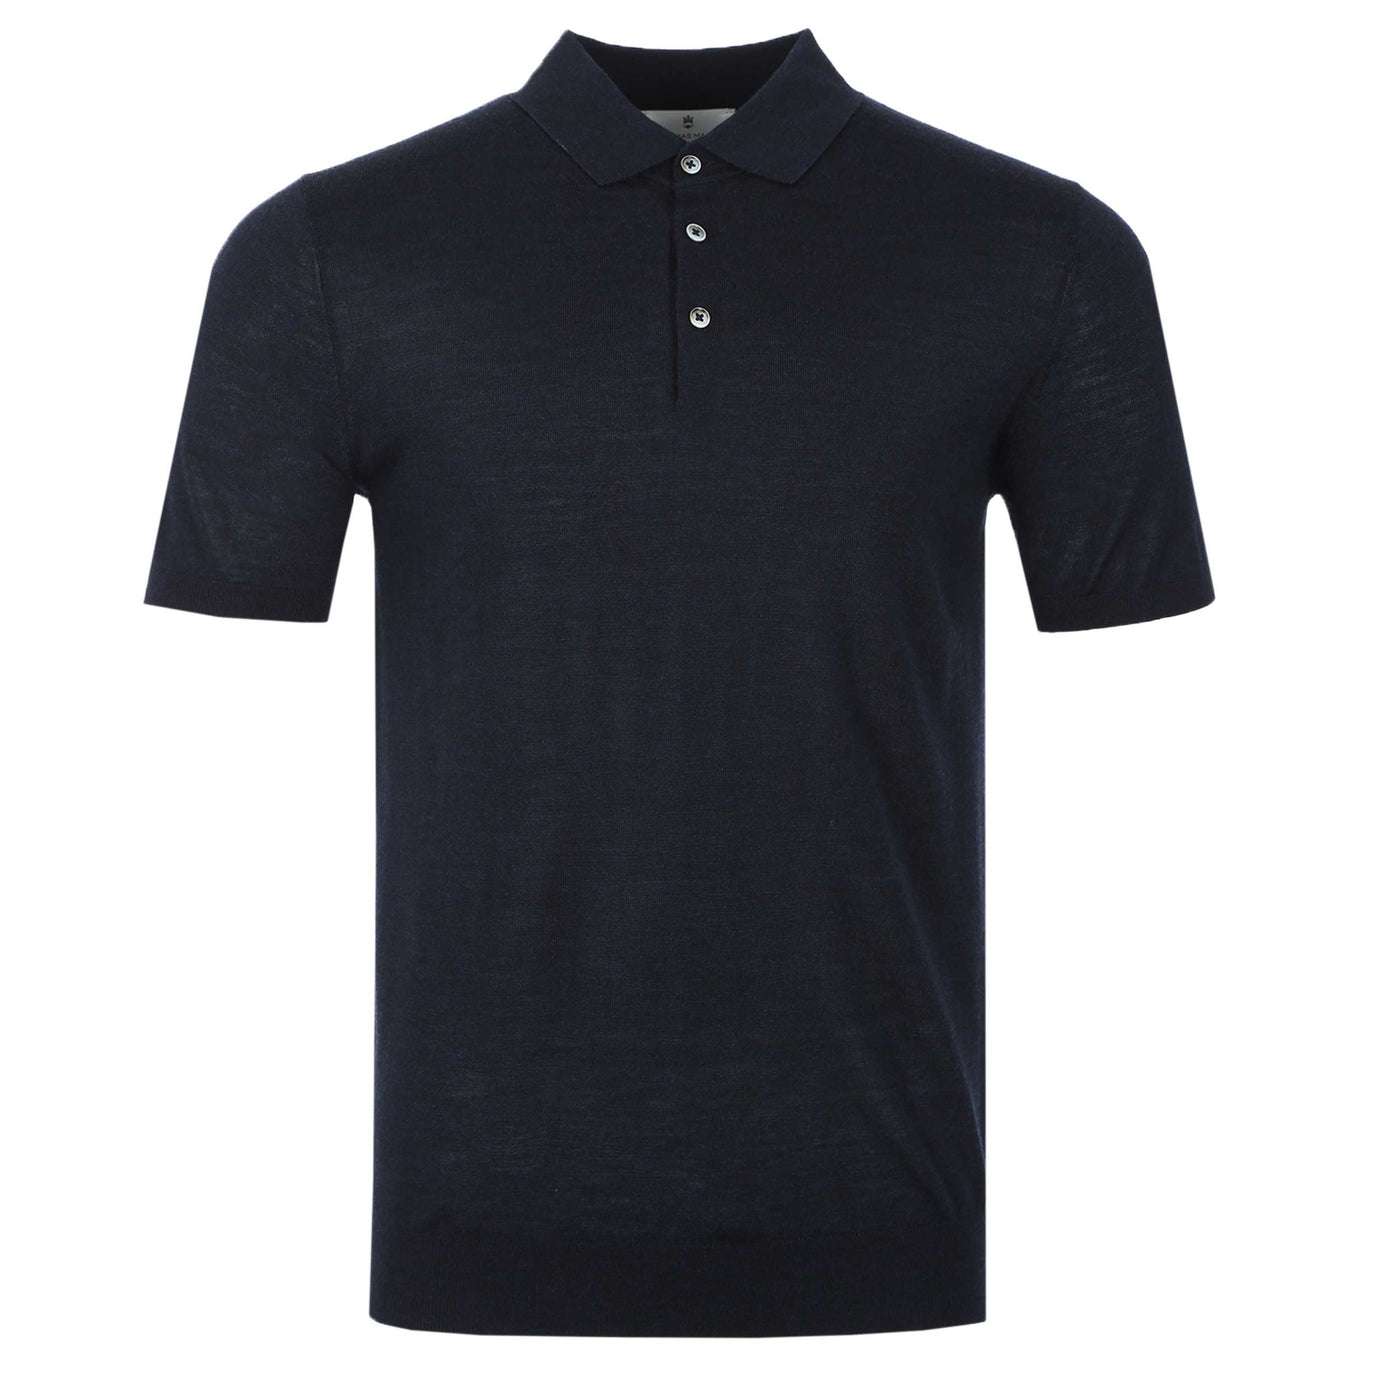 Thomas Maine 3 Button Knit Polo in Navy